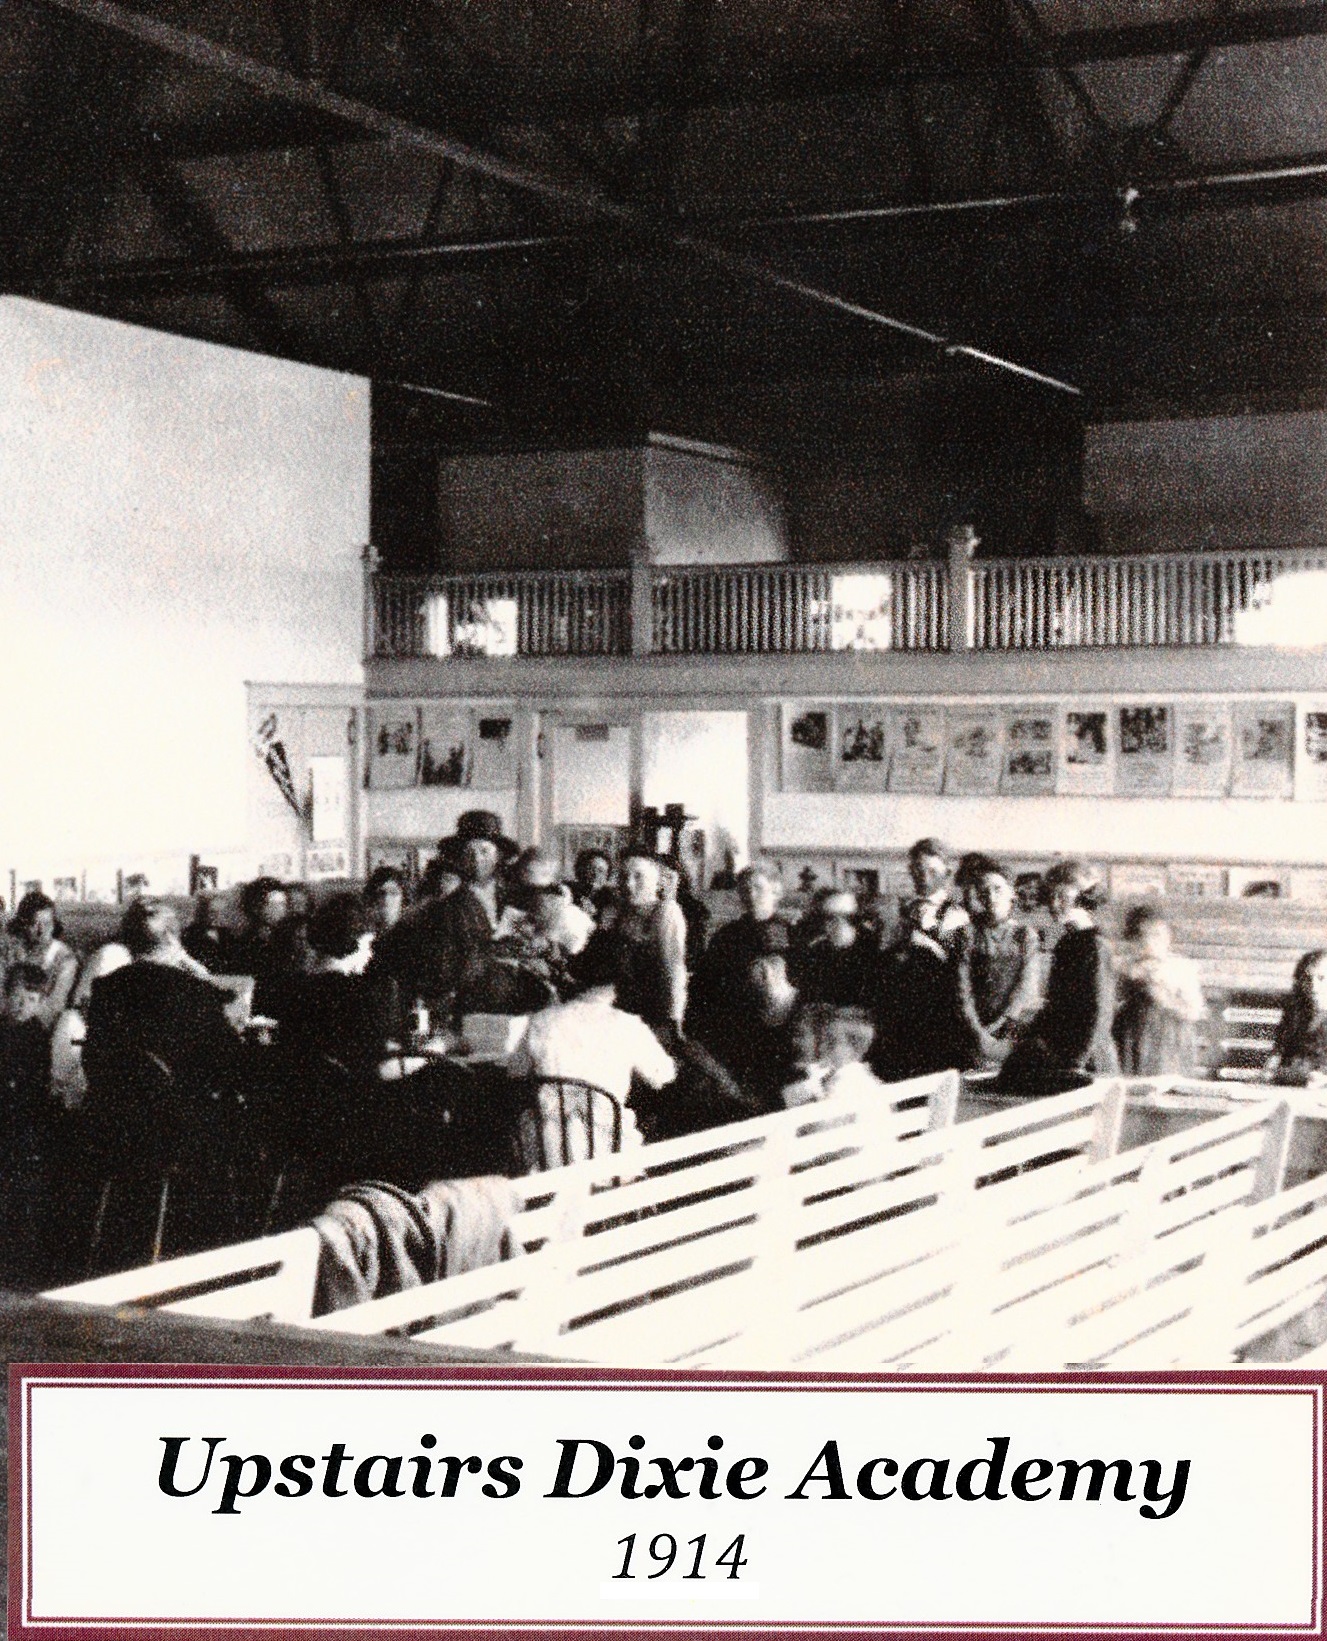 Upstairs at the Dixie Academy Building